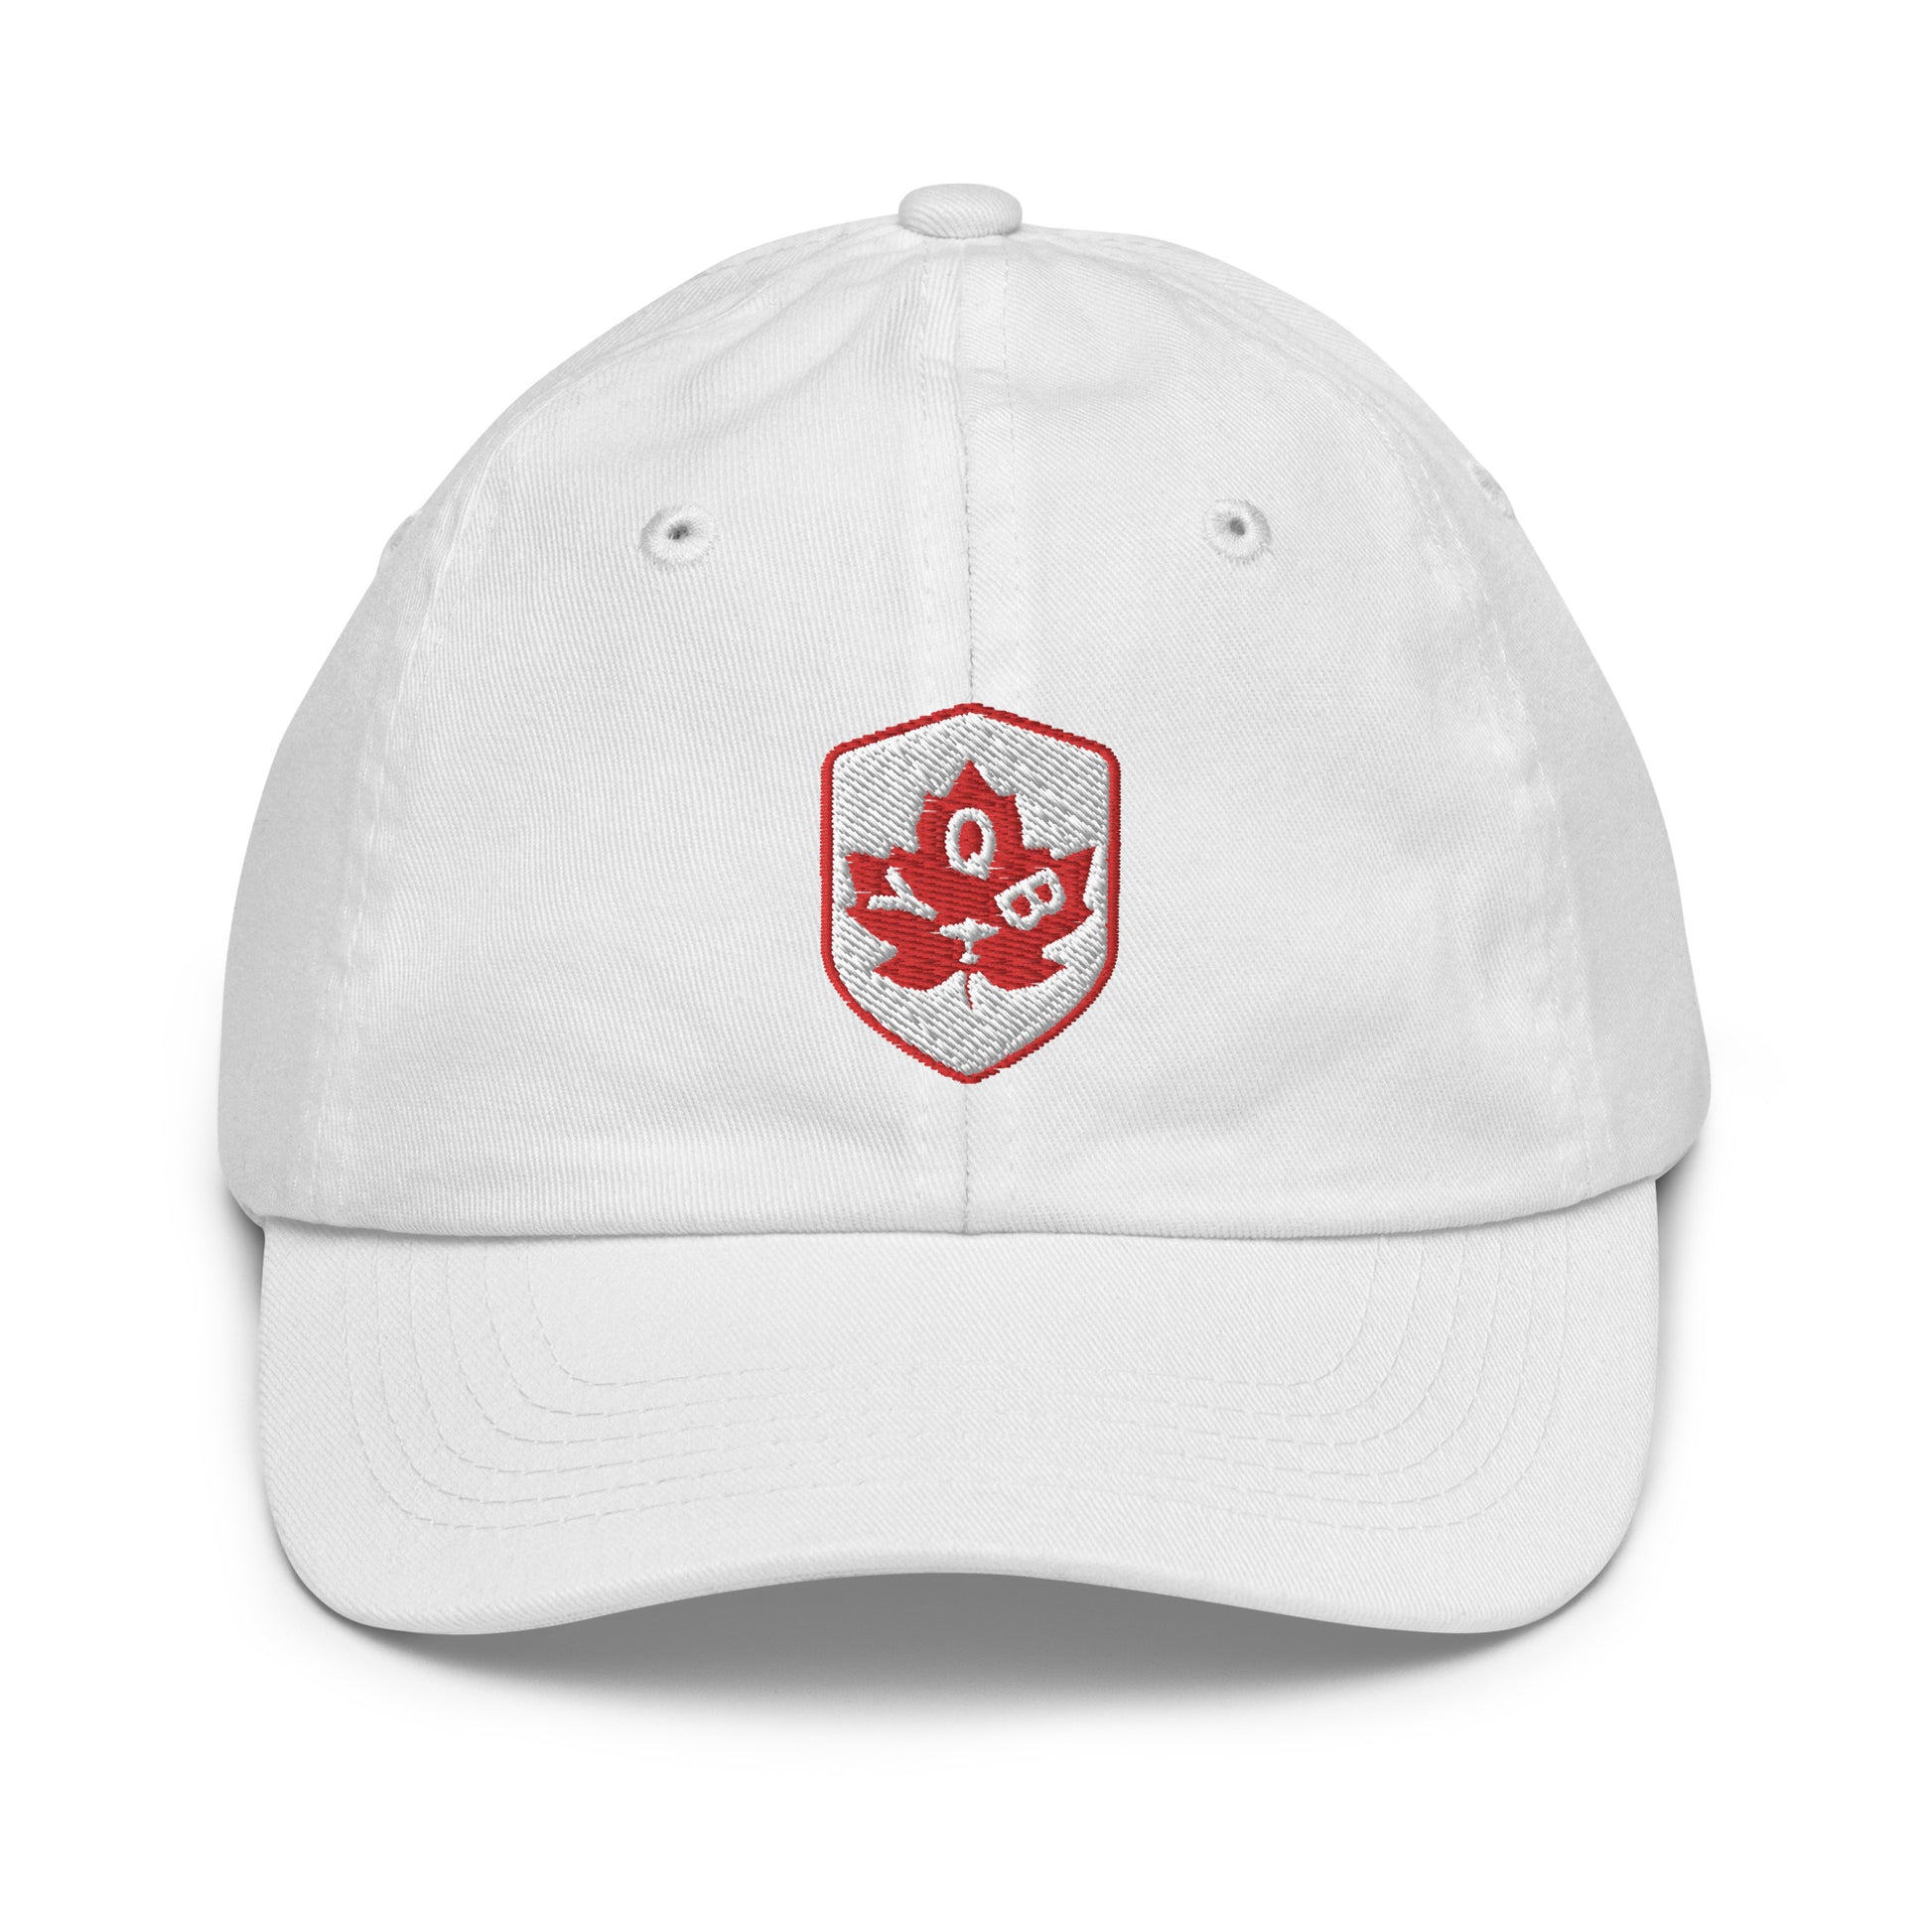 Maple Leaf Kid's Cap - Red/White • YQB Quebec City • YHM Designs - Image 26